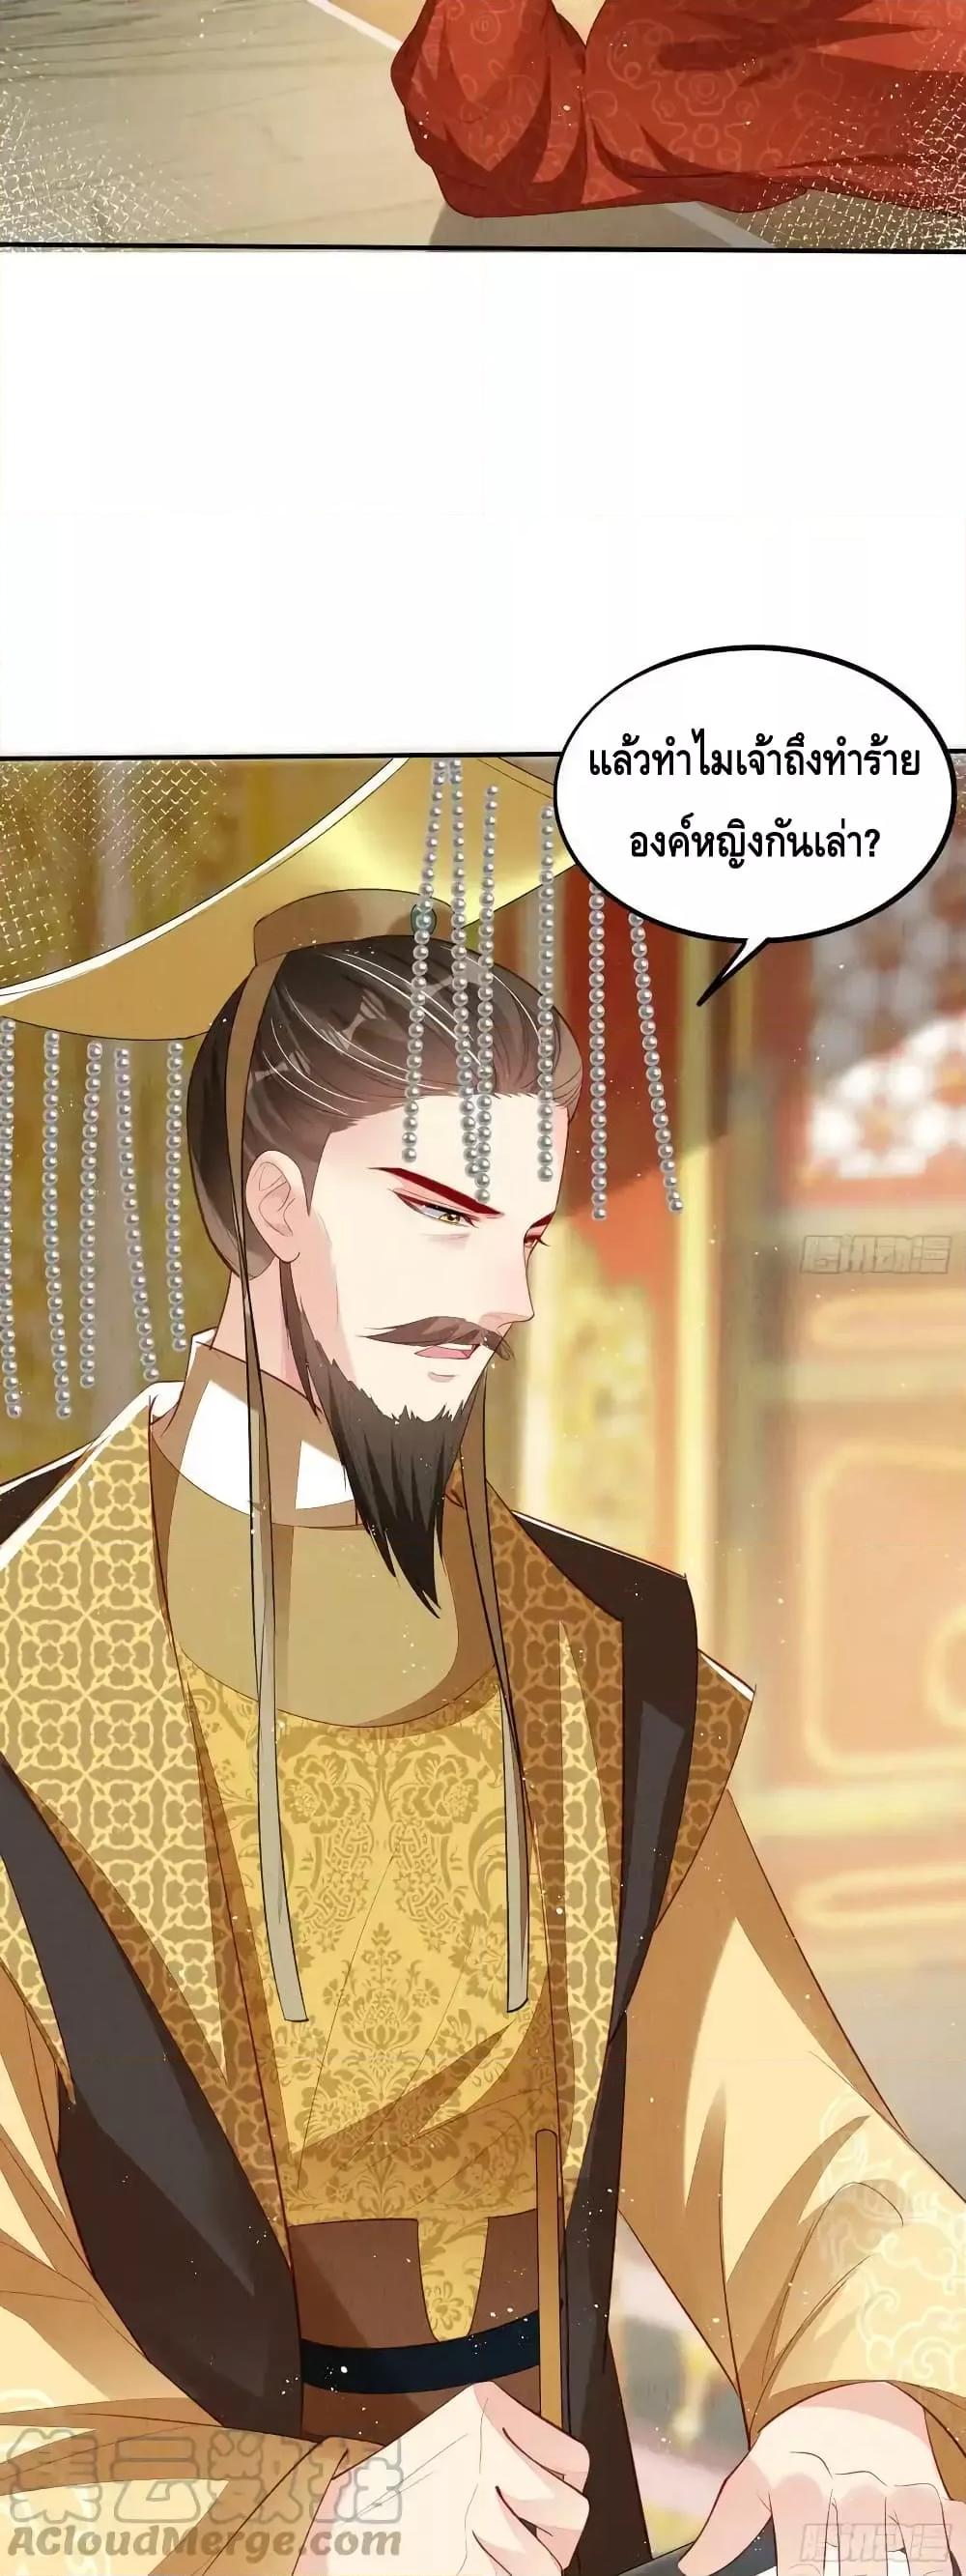 After I Bloom, a Hundred Flowers Will ill – ดอกไม้นับ ตอนที่ 70 (10)